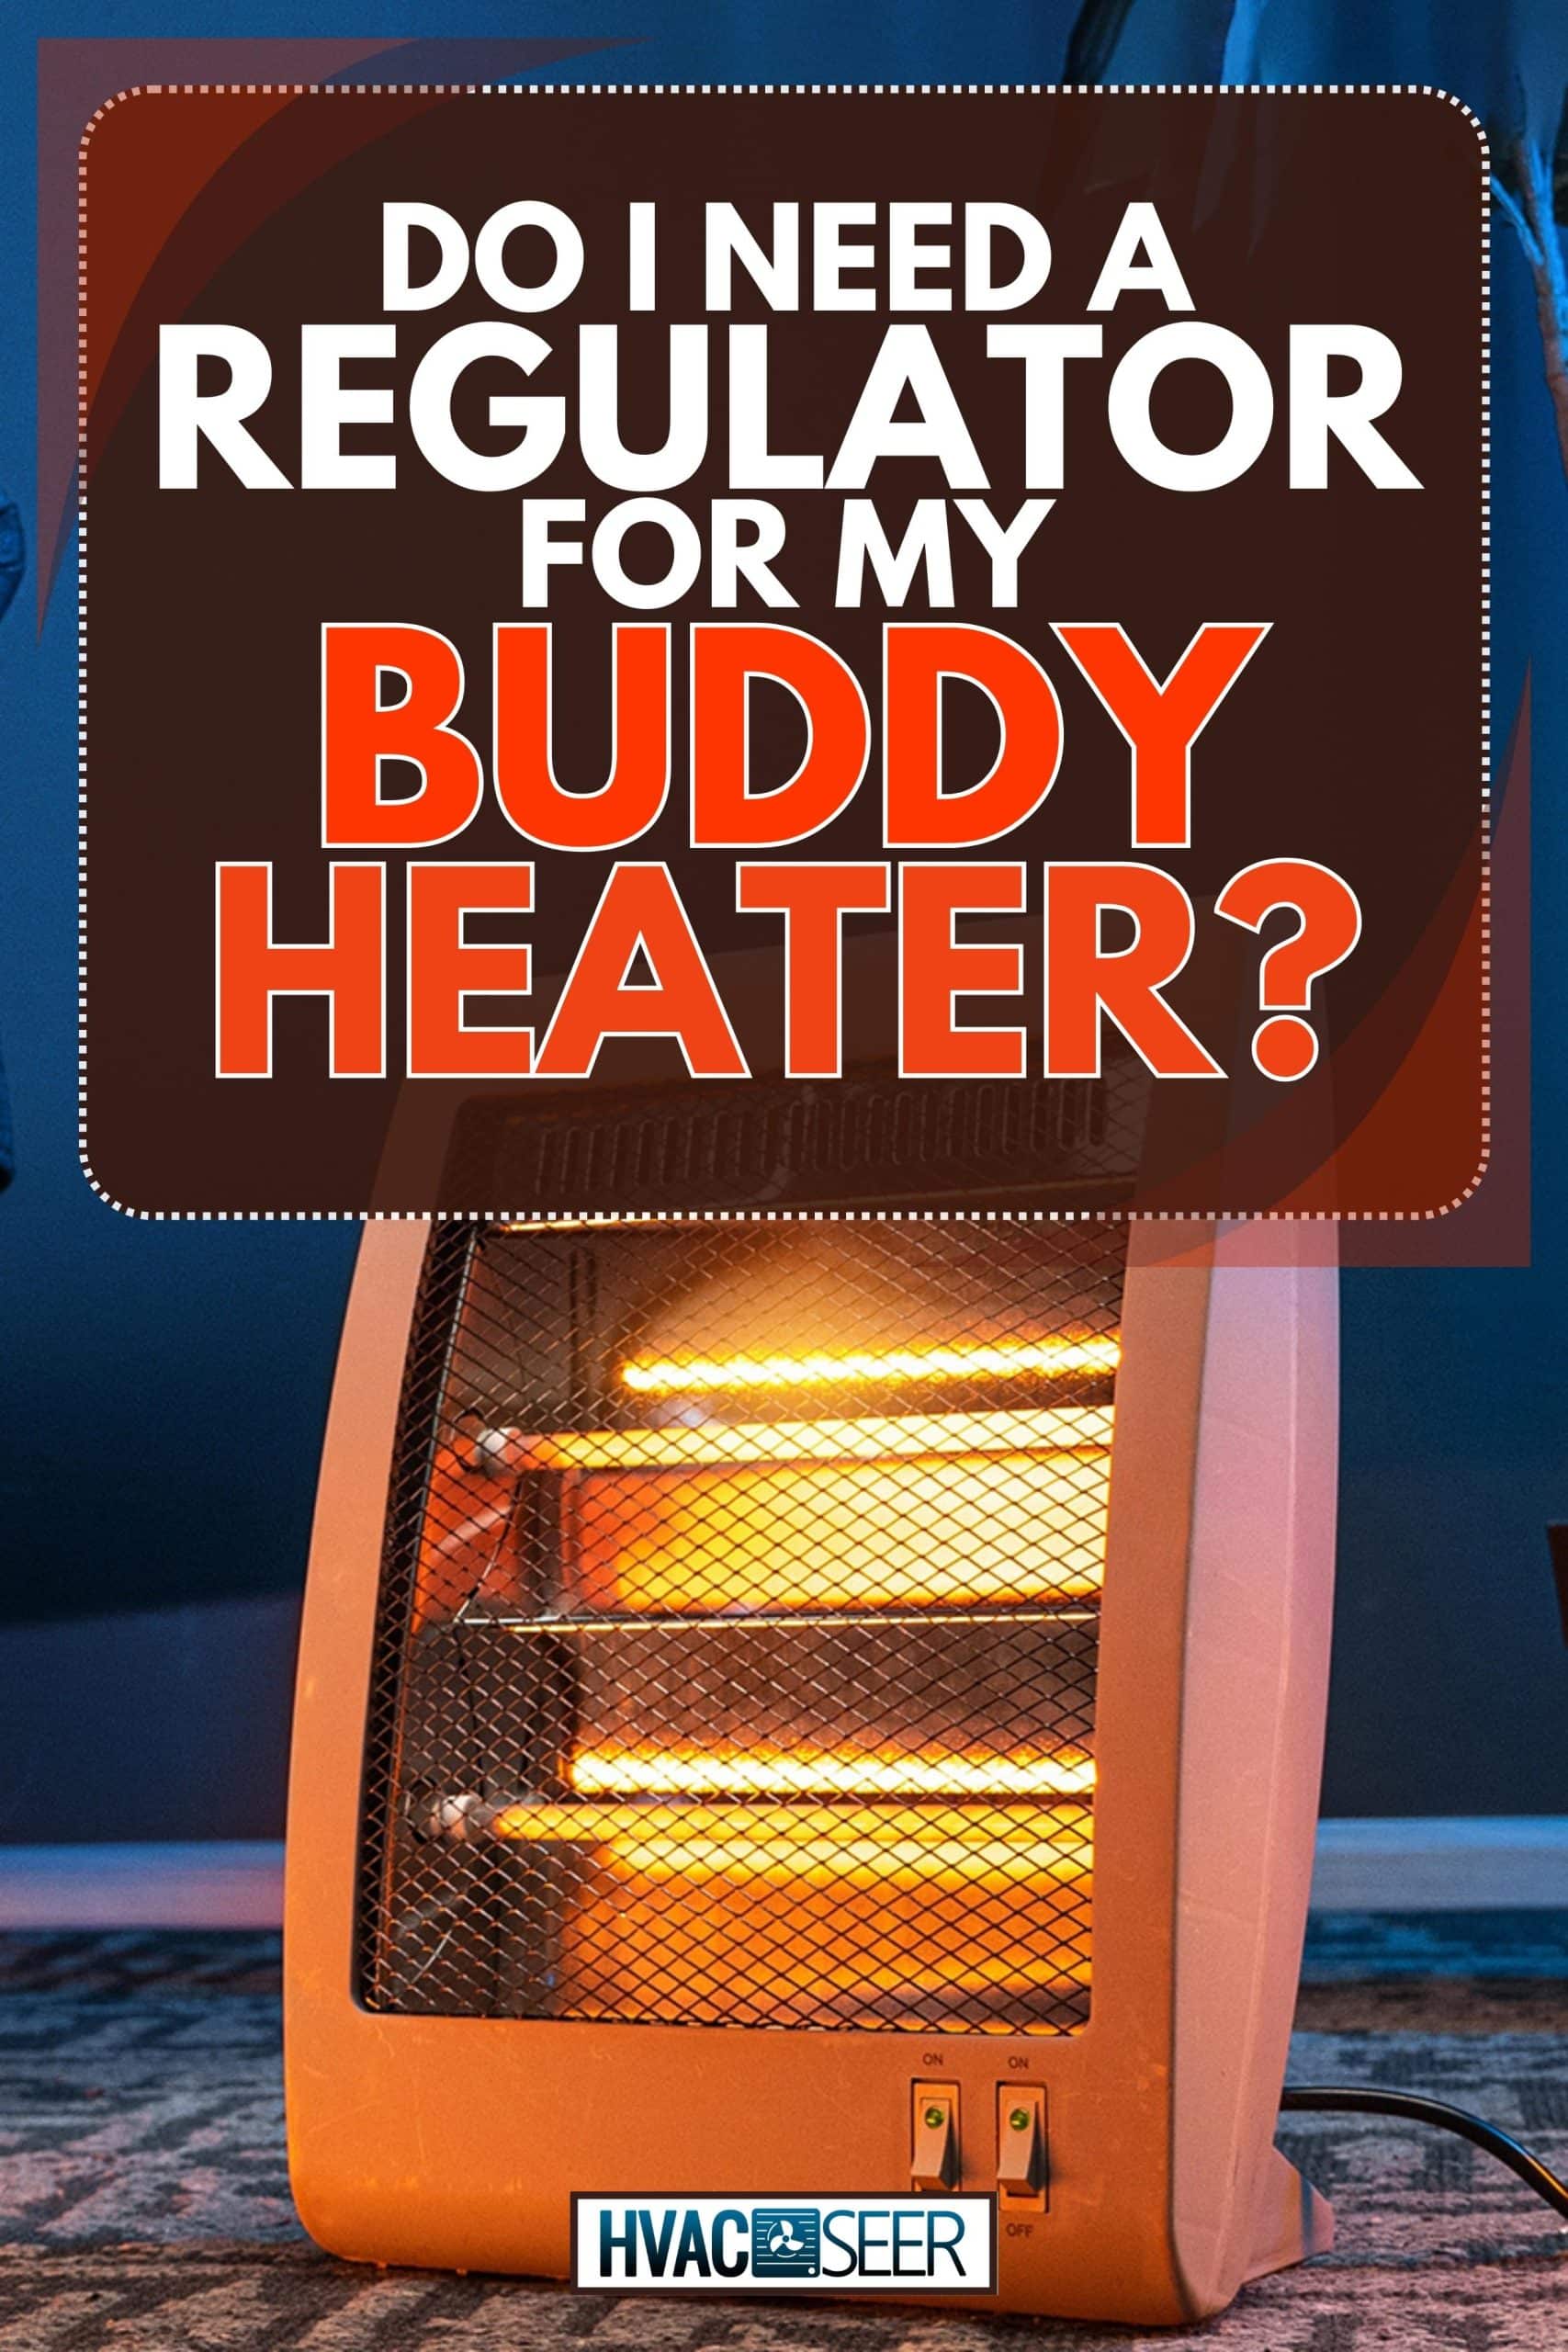 Modern electric infrared heater in the living room, Do I Need A Regulator For My Buddy Heater?